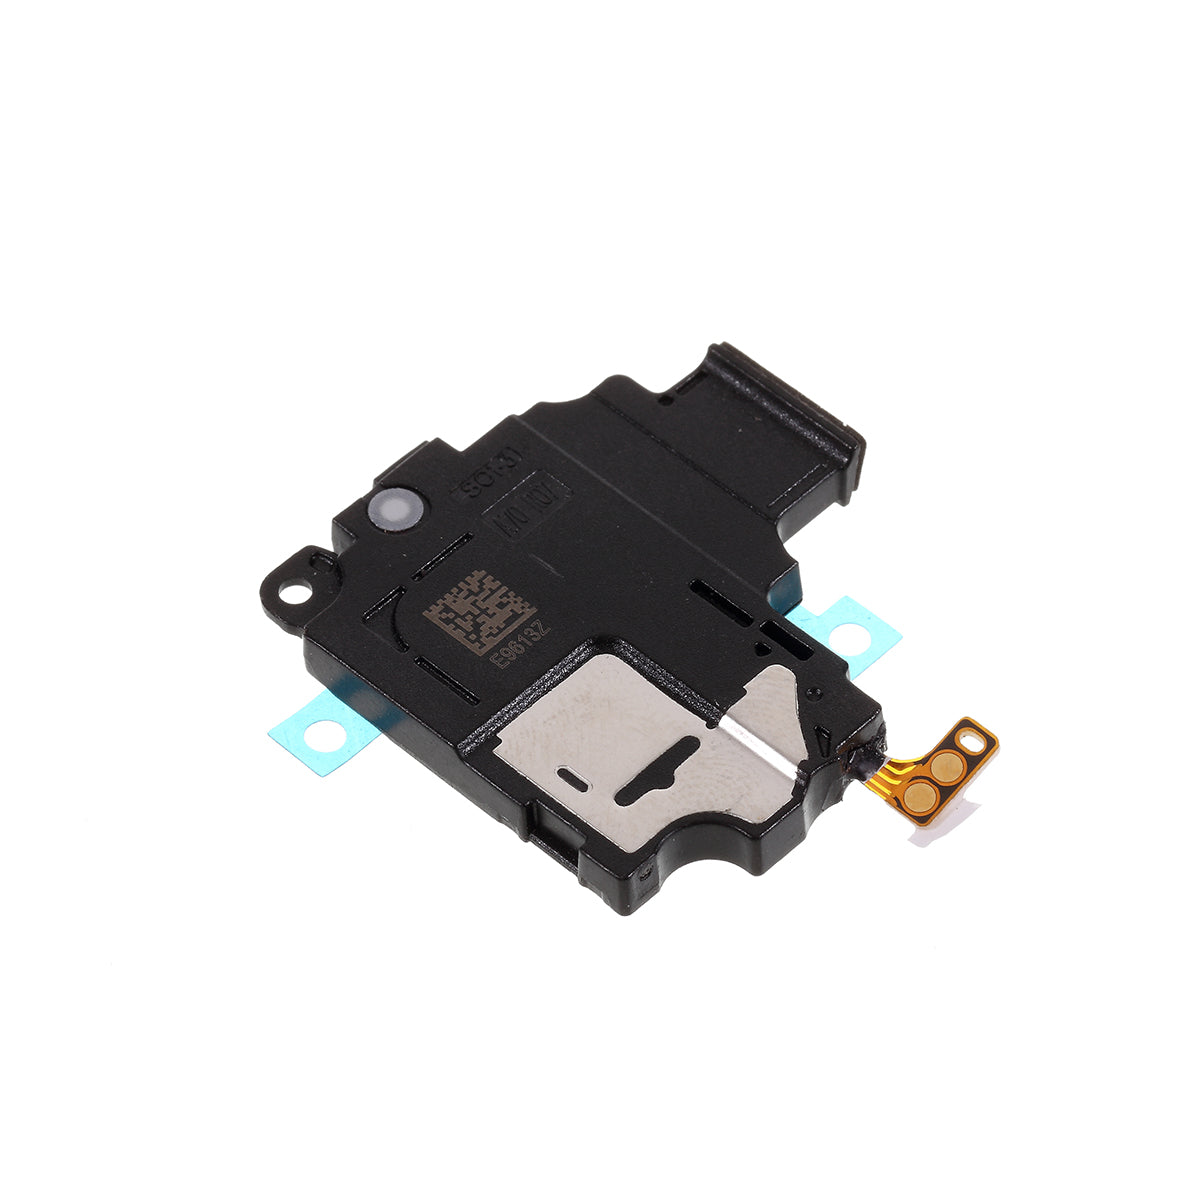 OEM Loud Speaker Replacement for Samsung Galaxy A70 SM-A705